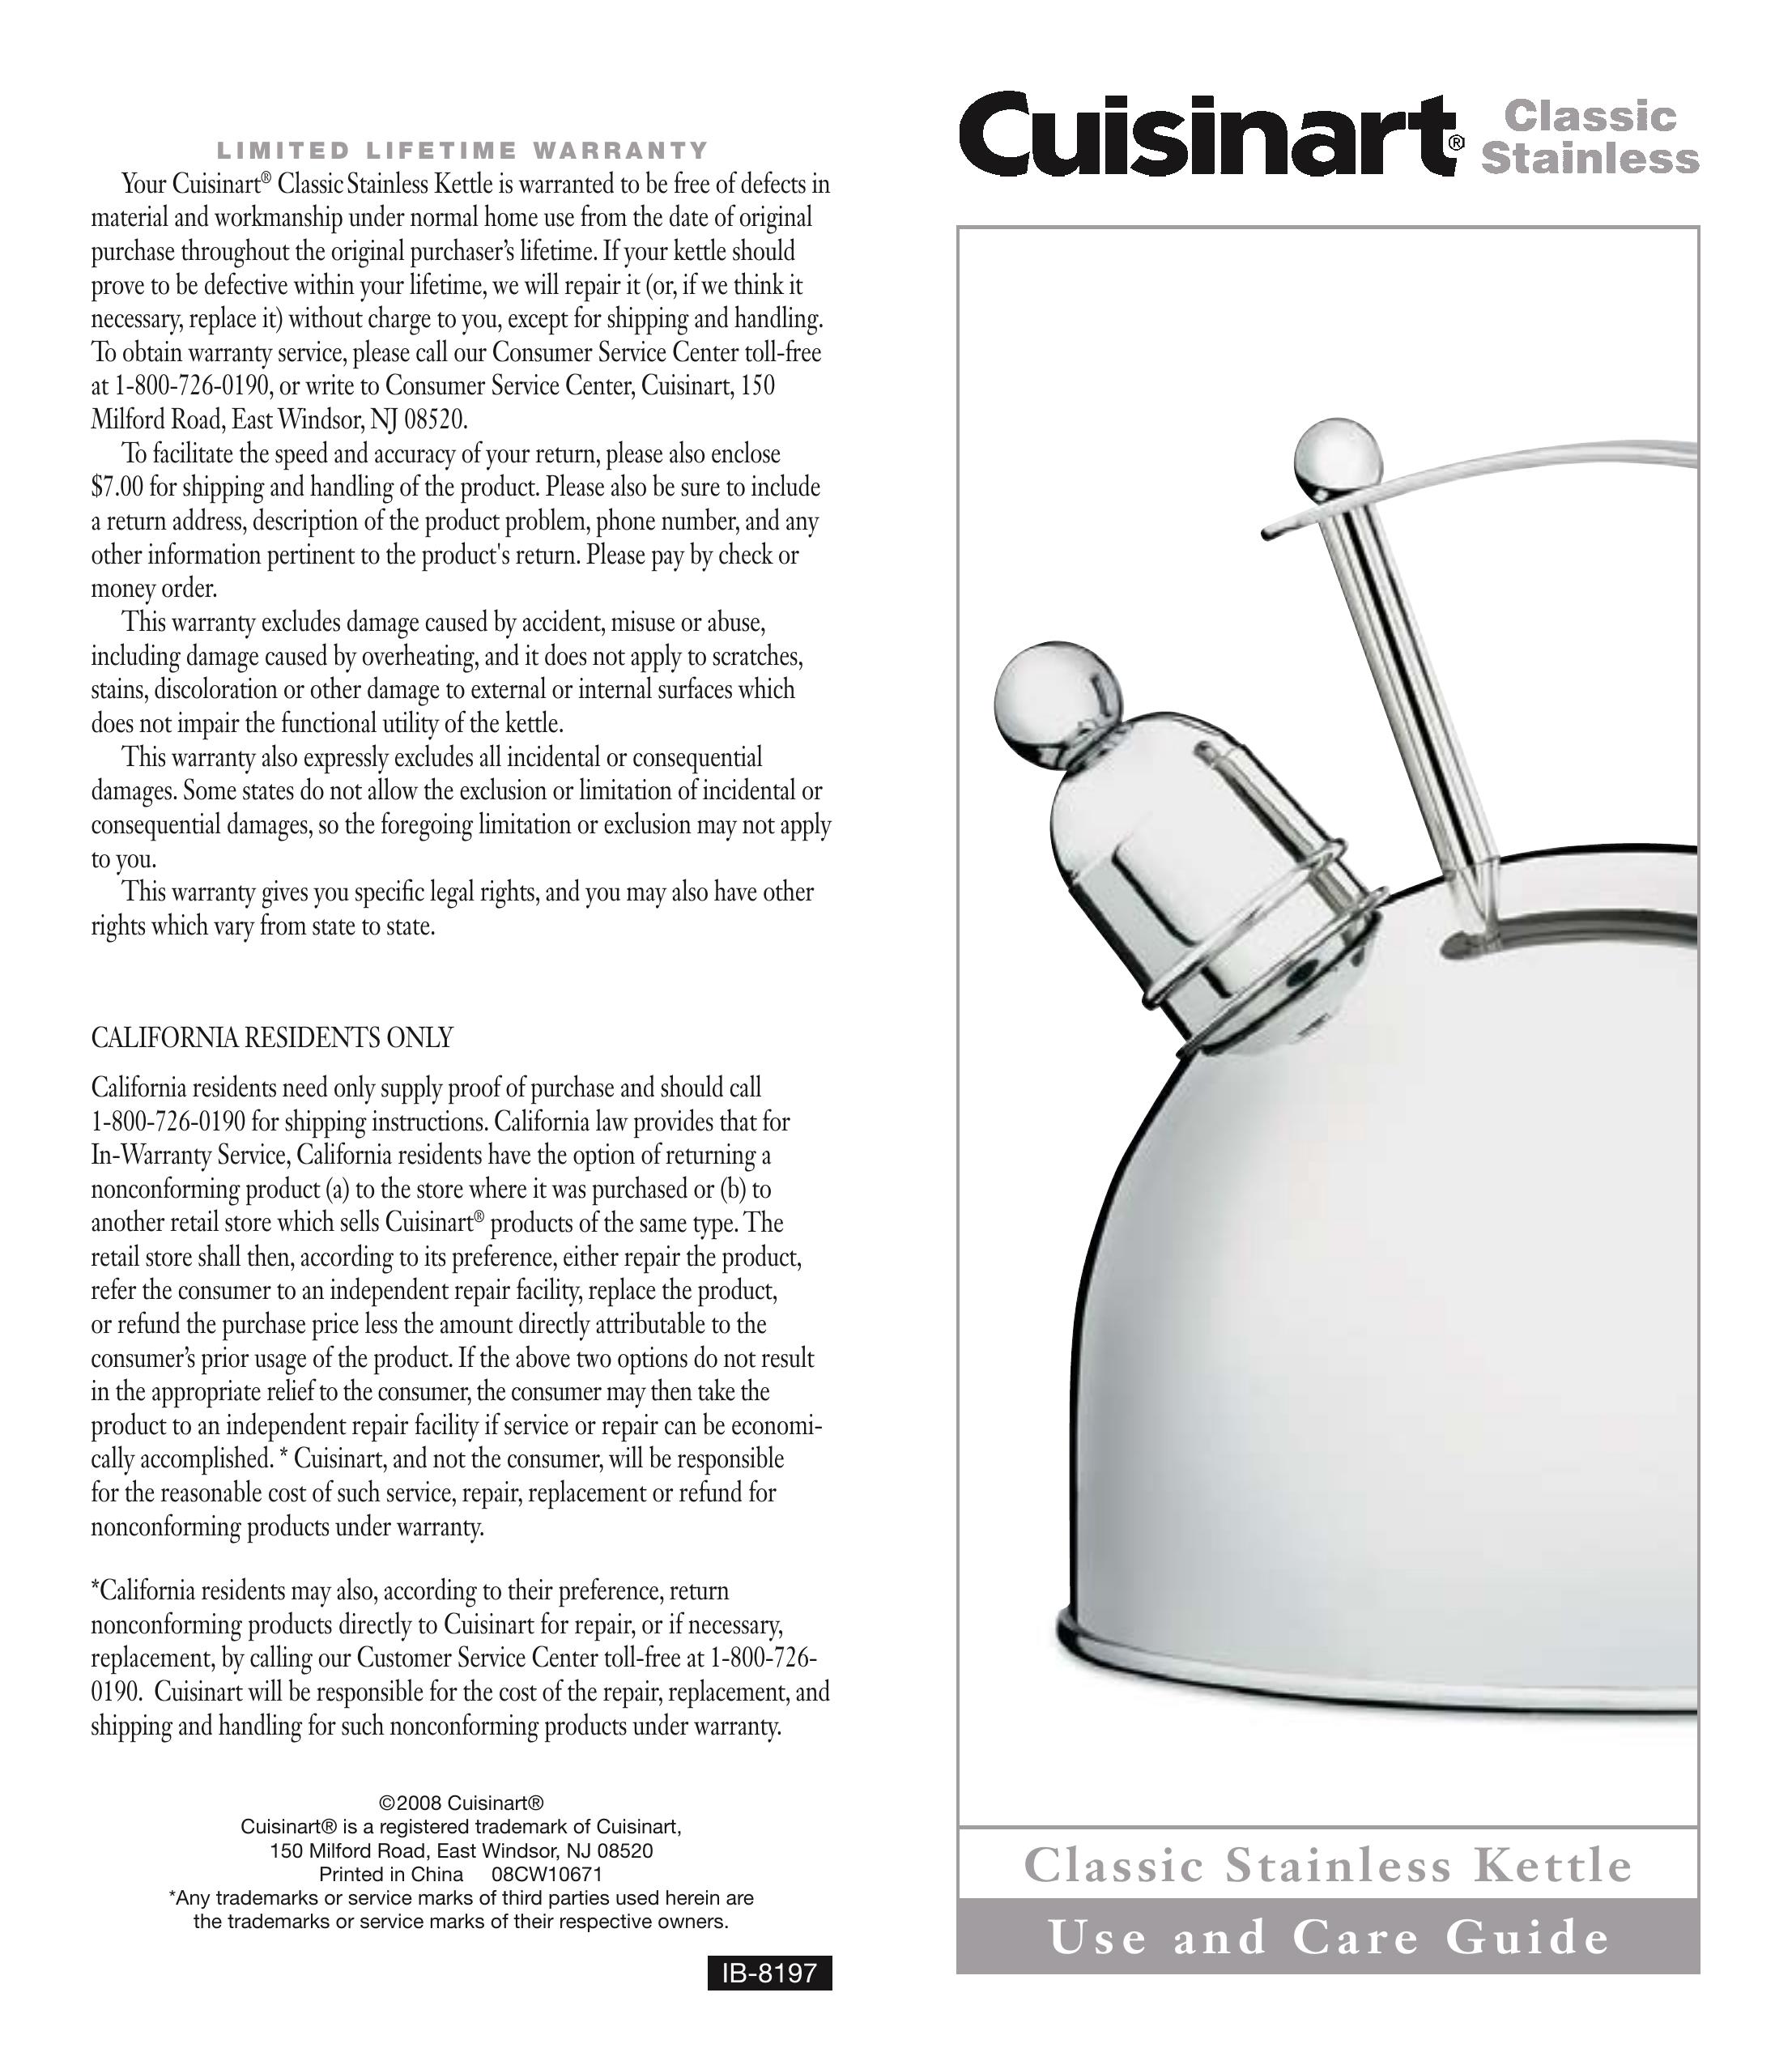 Cuisinart classic stainless kettle Life Jacket User Manual